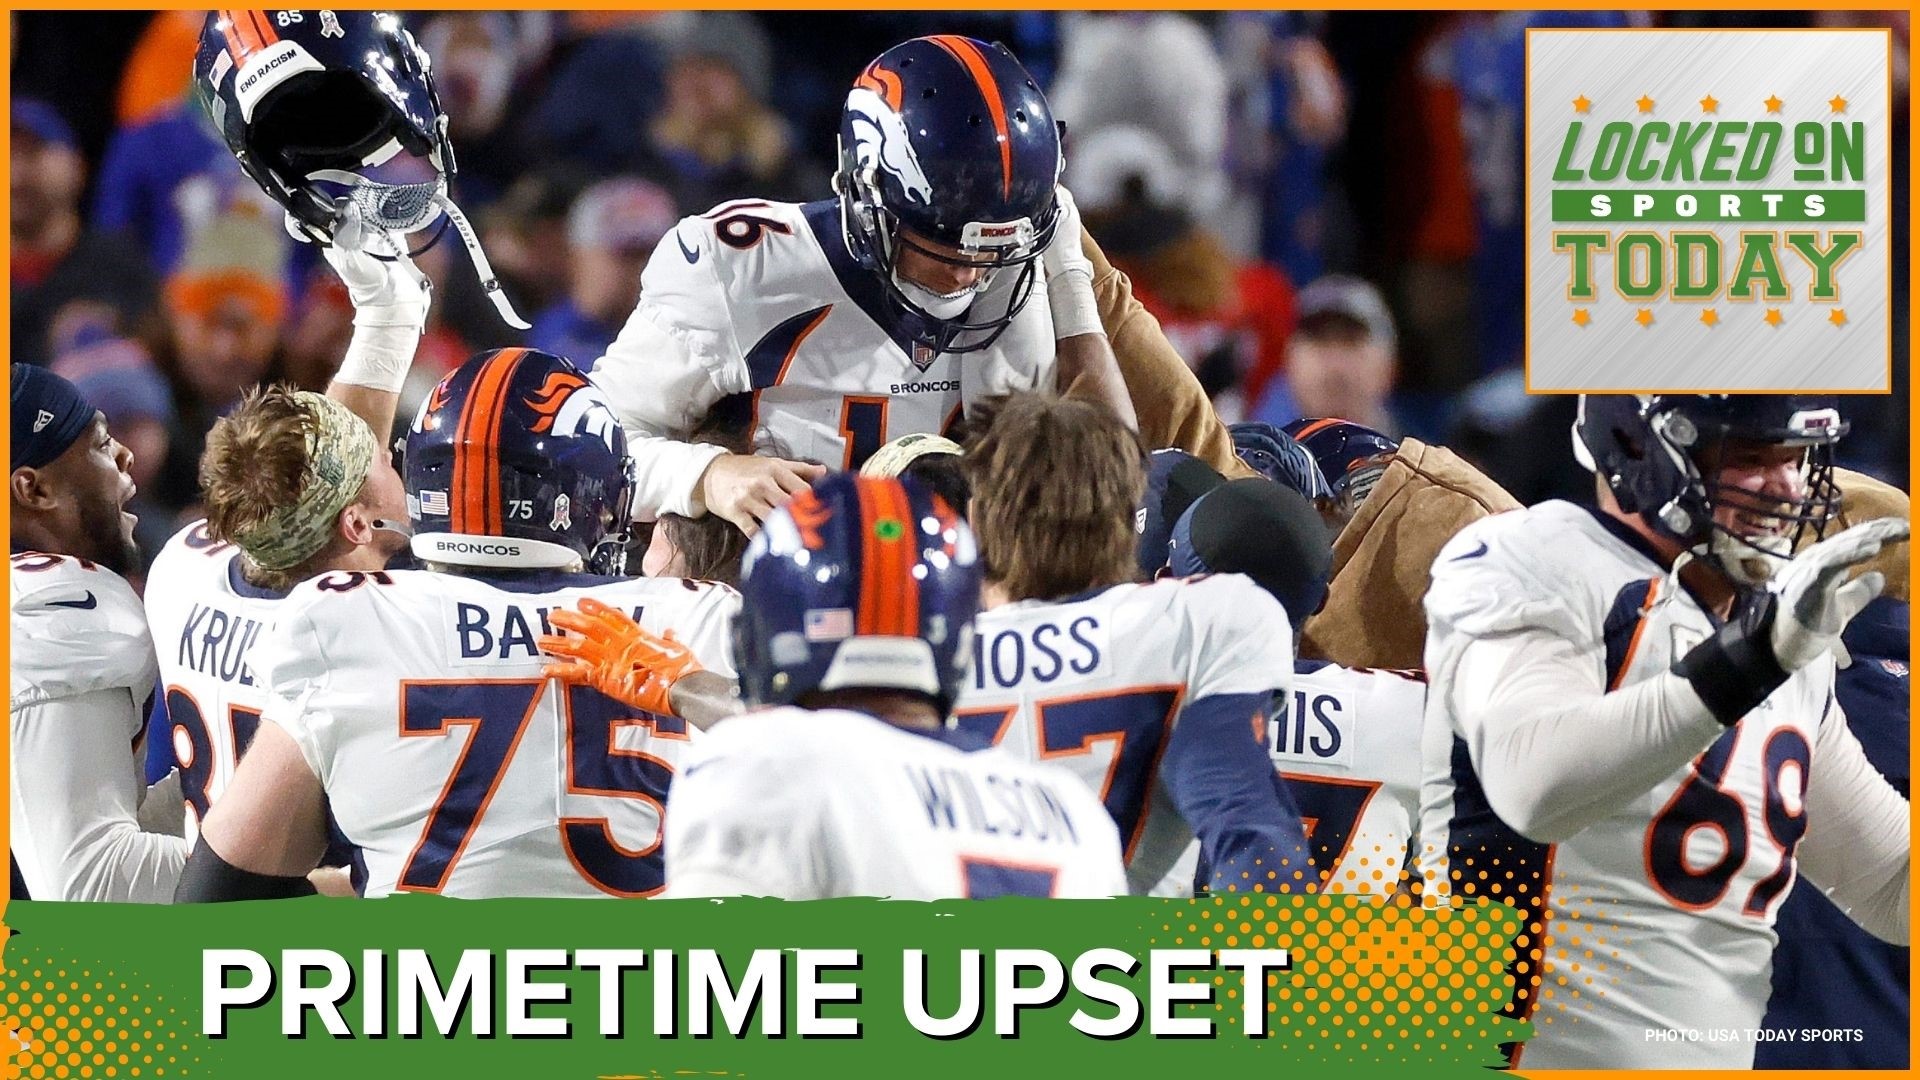 Discussing the day's top sports stories from the Broncos get the upset win to the confusing Knicks team and the frustration of the Ravens.